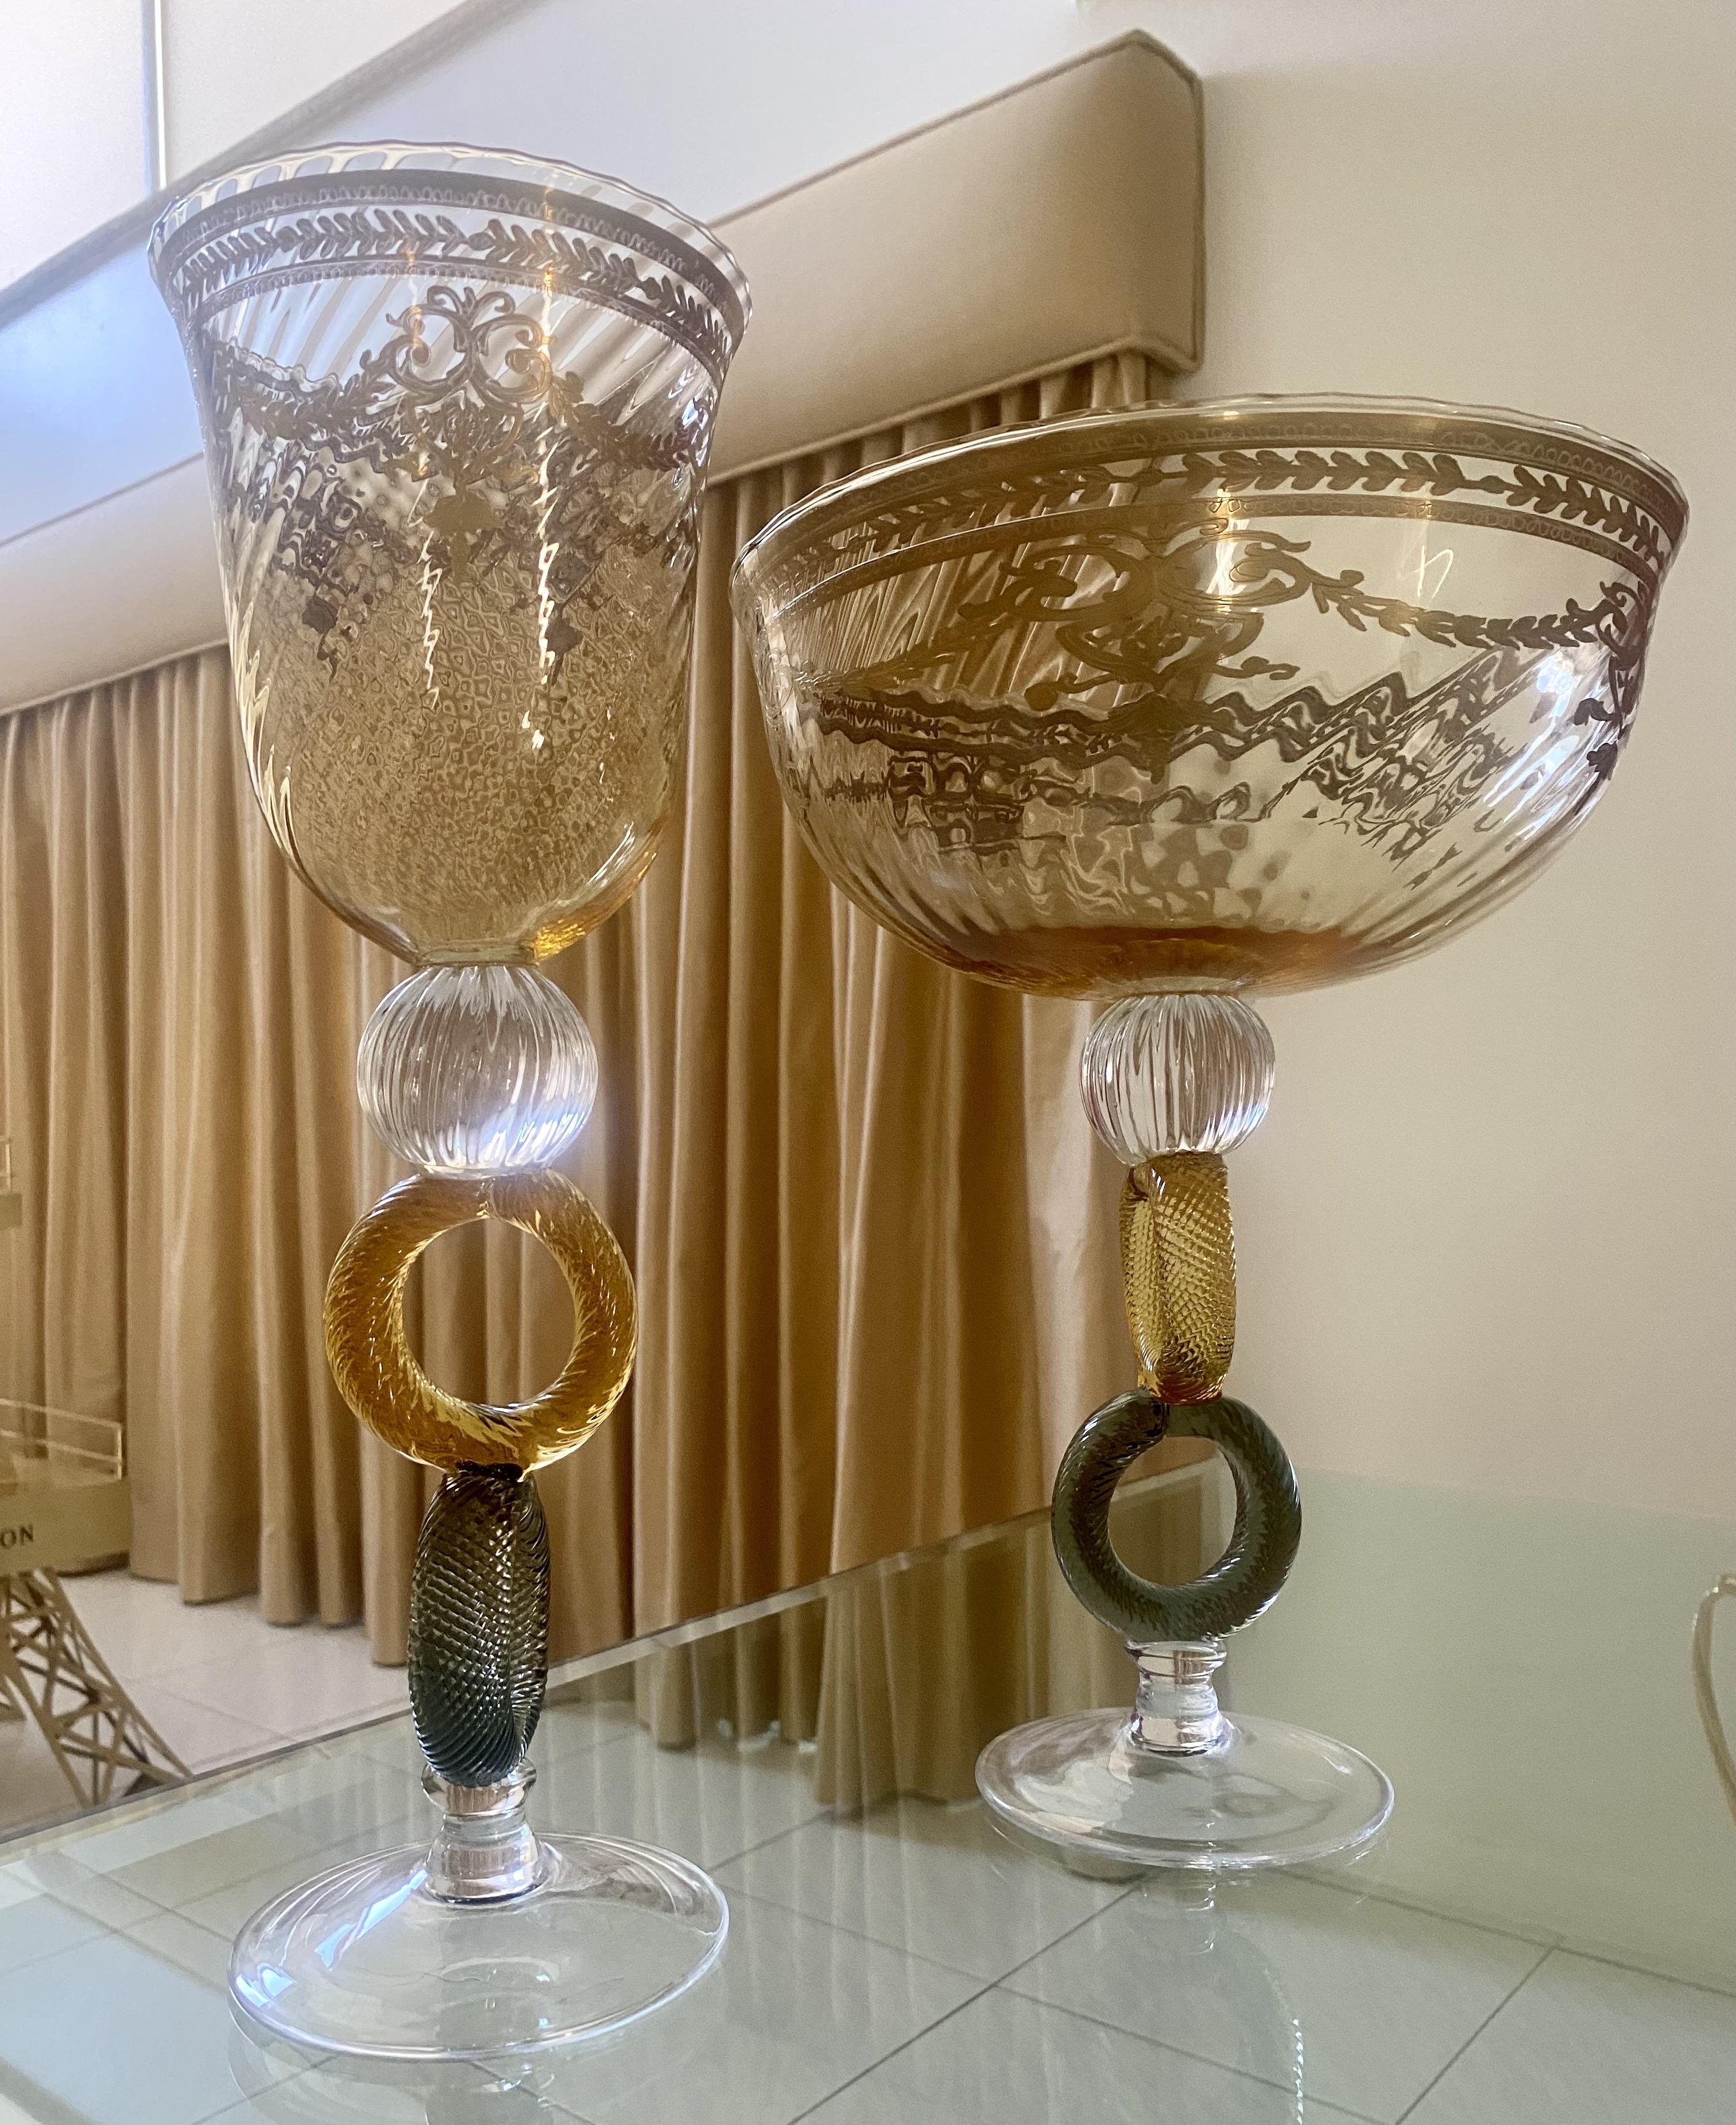 Pair of Italian Mid-Century Venetian Glass Art with Gold Trim For Sale 1